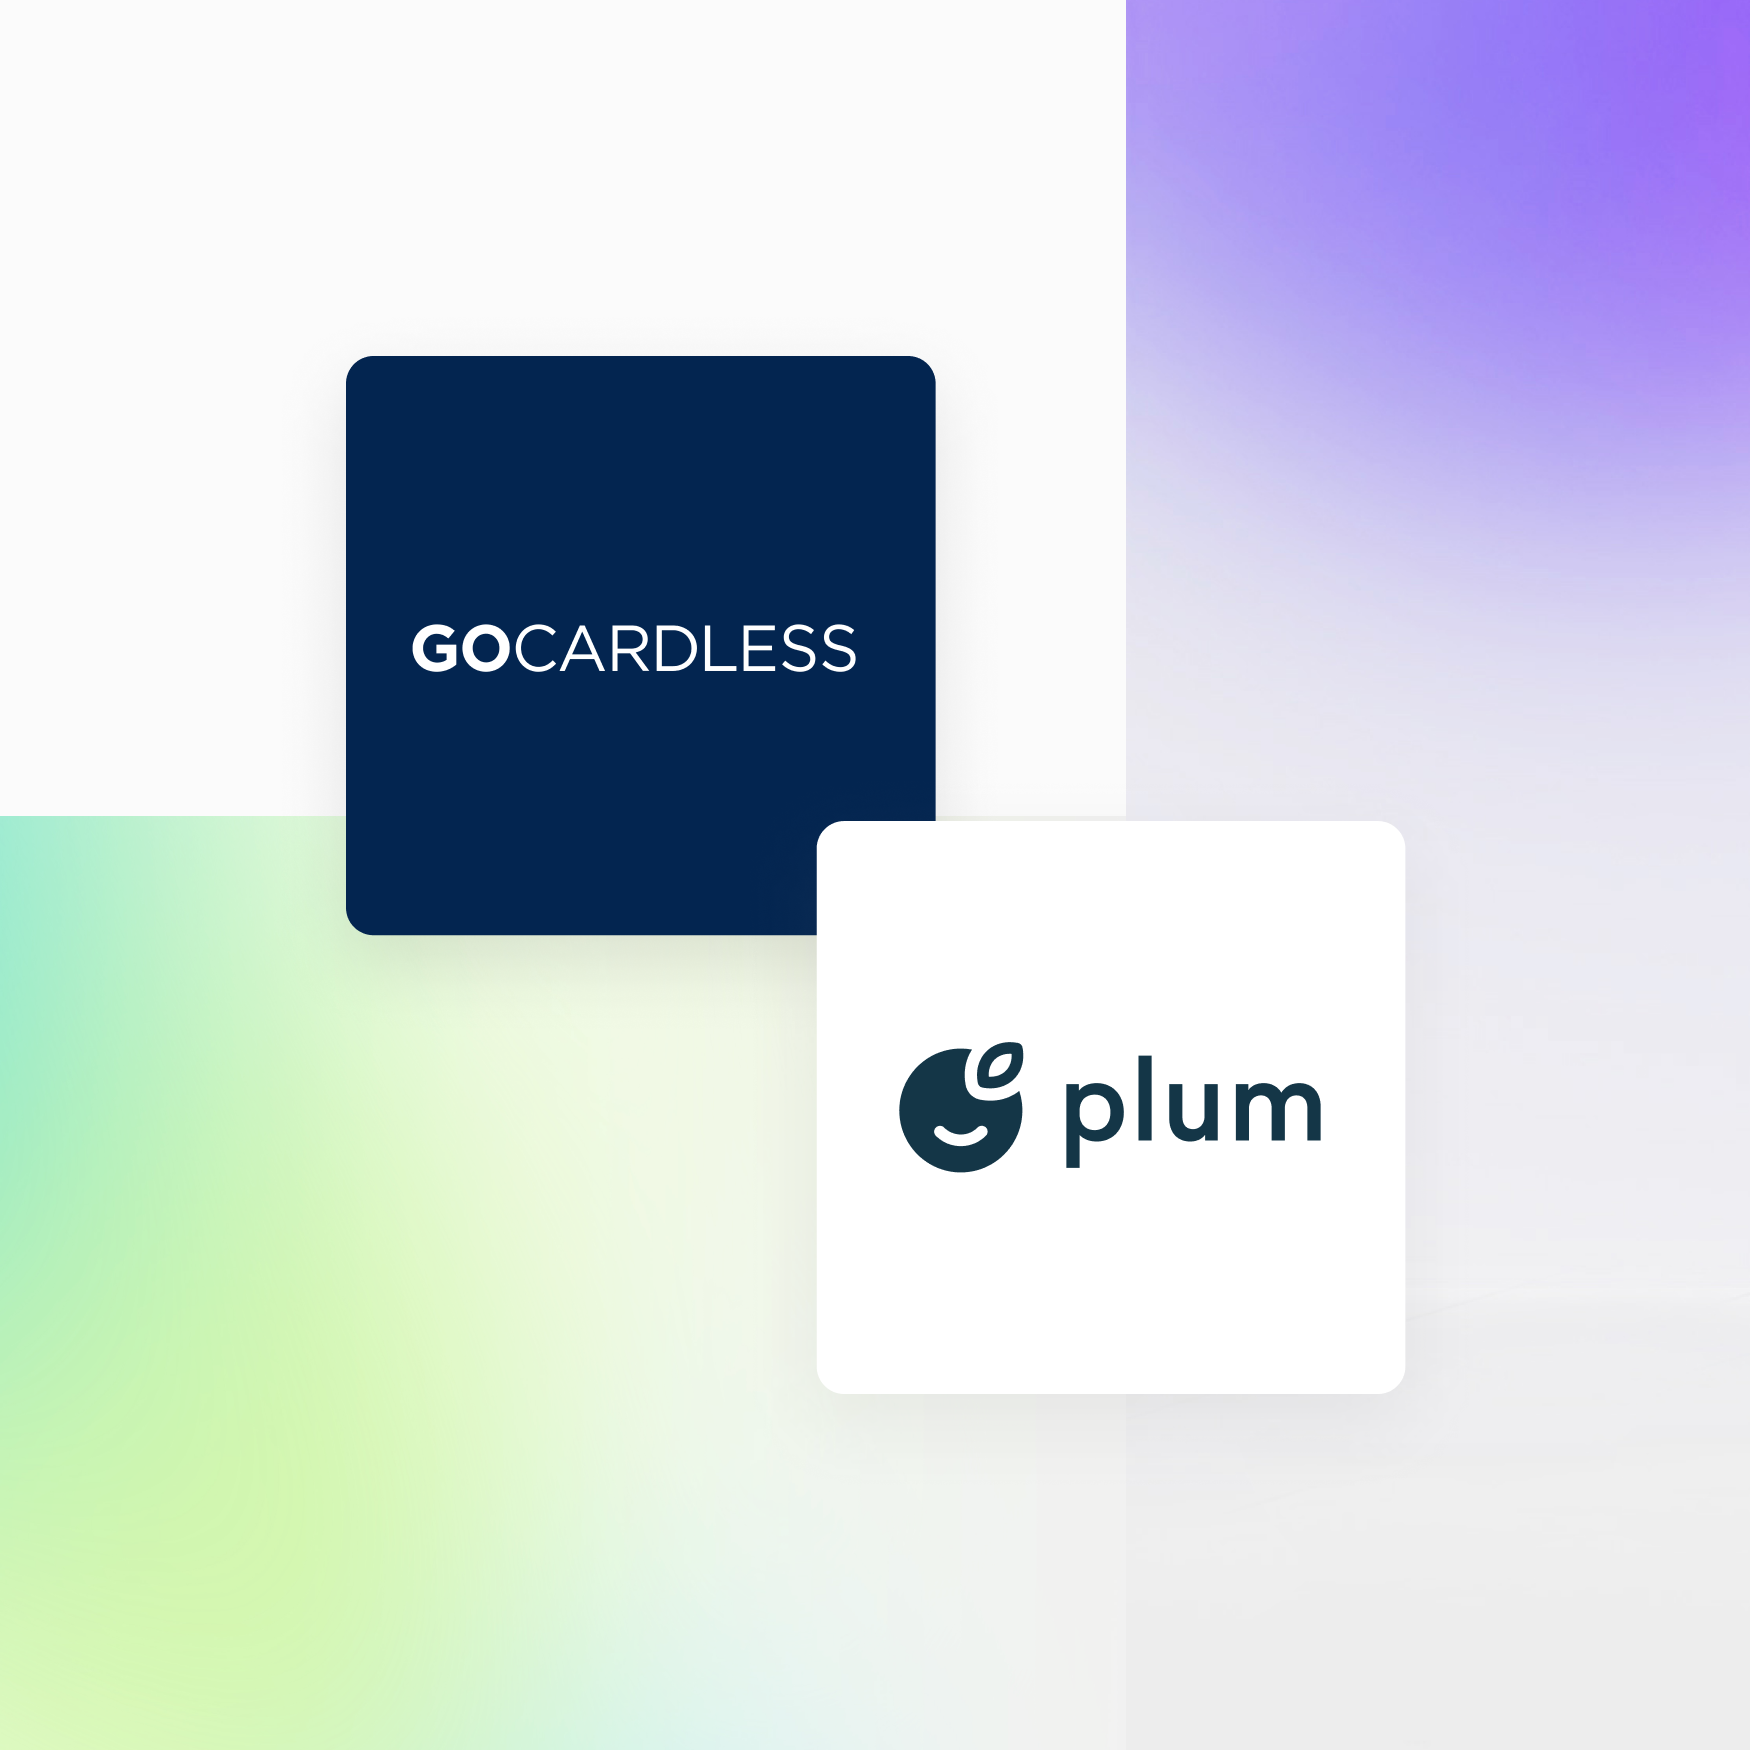 “The impact was immediate — we’ve seen payment failures drop from 3.6% to 0.48% in three months. This 7.5x improvement in failed payments collected is huge for a fast-growing company like Plum — and helps ensure a seamless experience for our customers.”